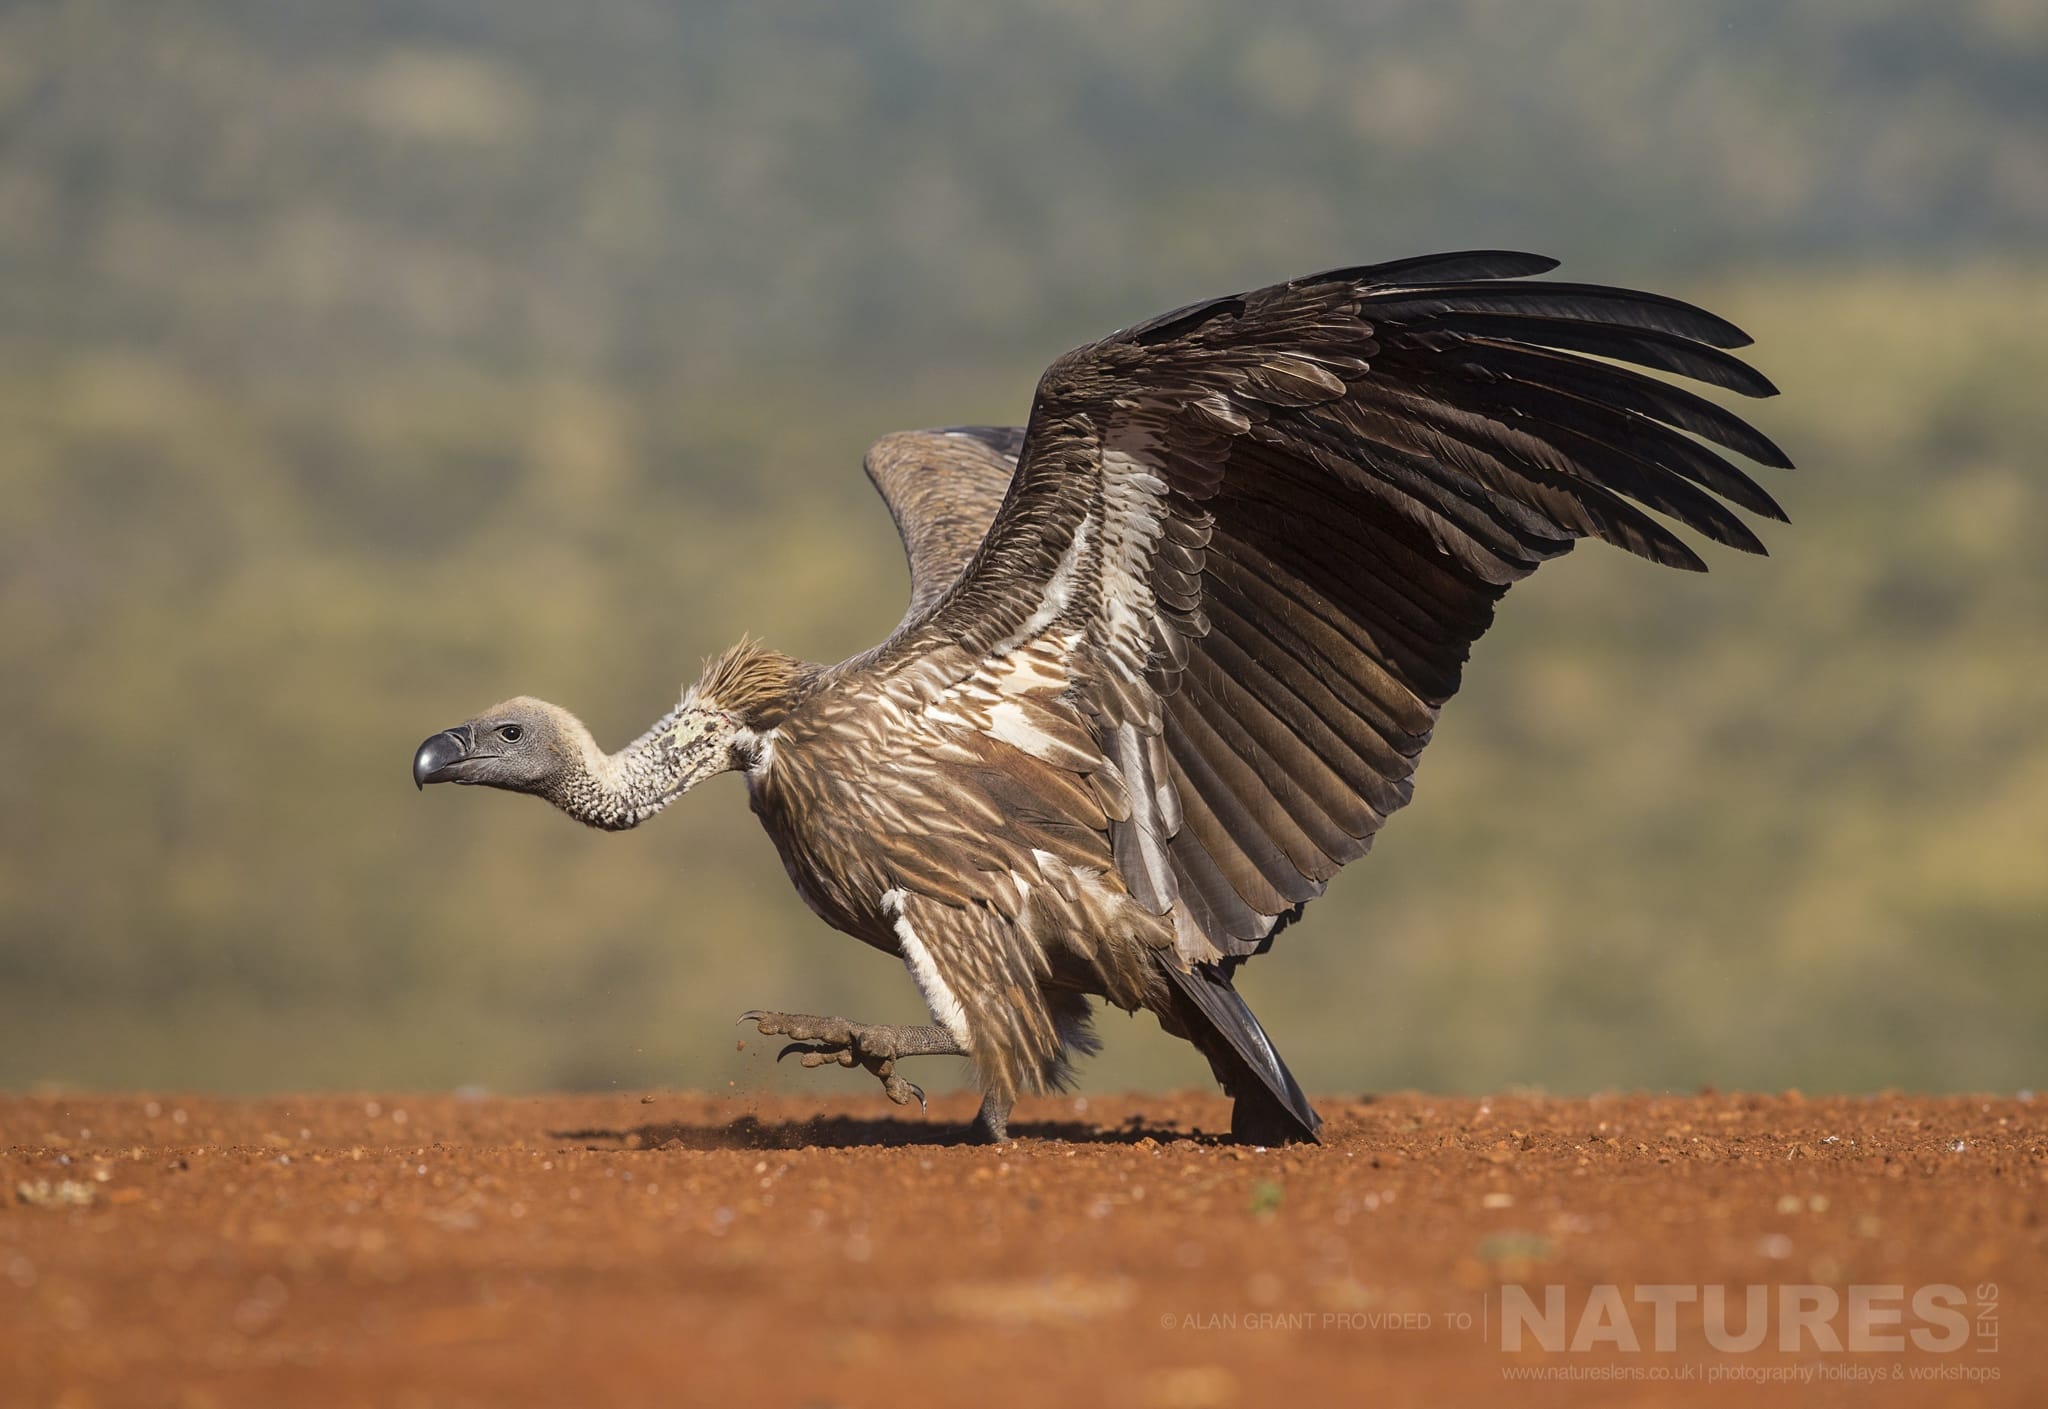 A goose stepping Vulture photographed during the NaturesLens Zimanga photo tour